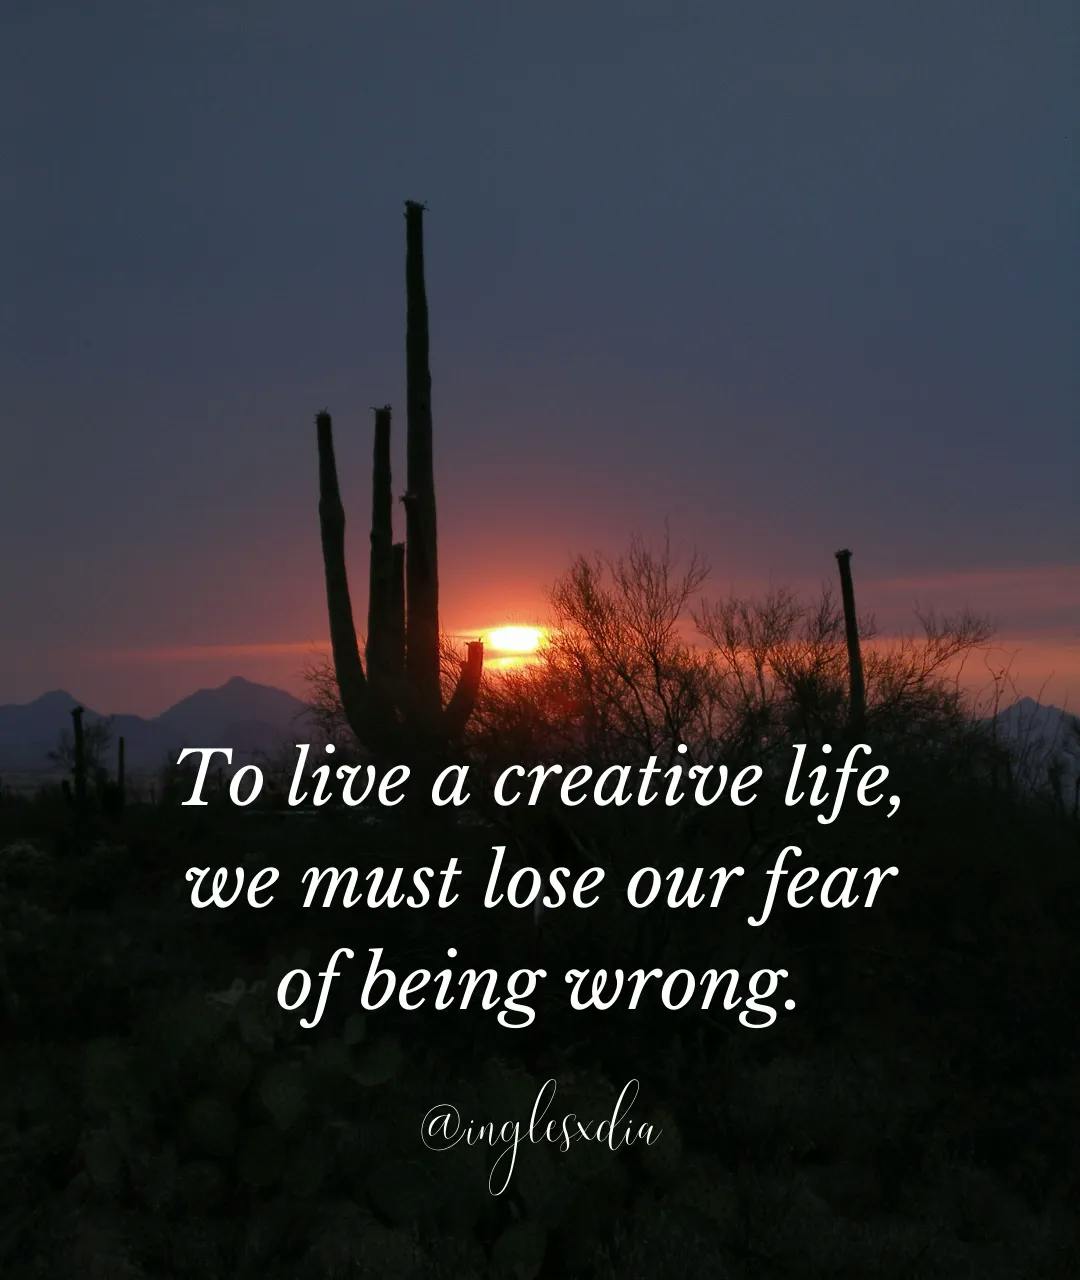 Frases motivadoras en inglés: To live a creative life, we must lose our fear of being wrong.